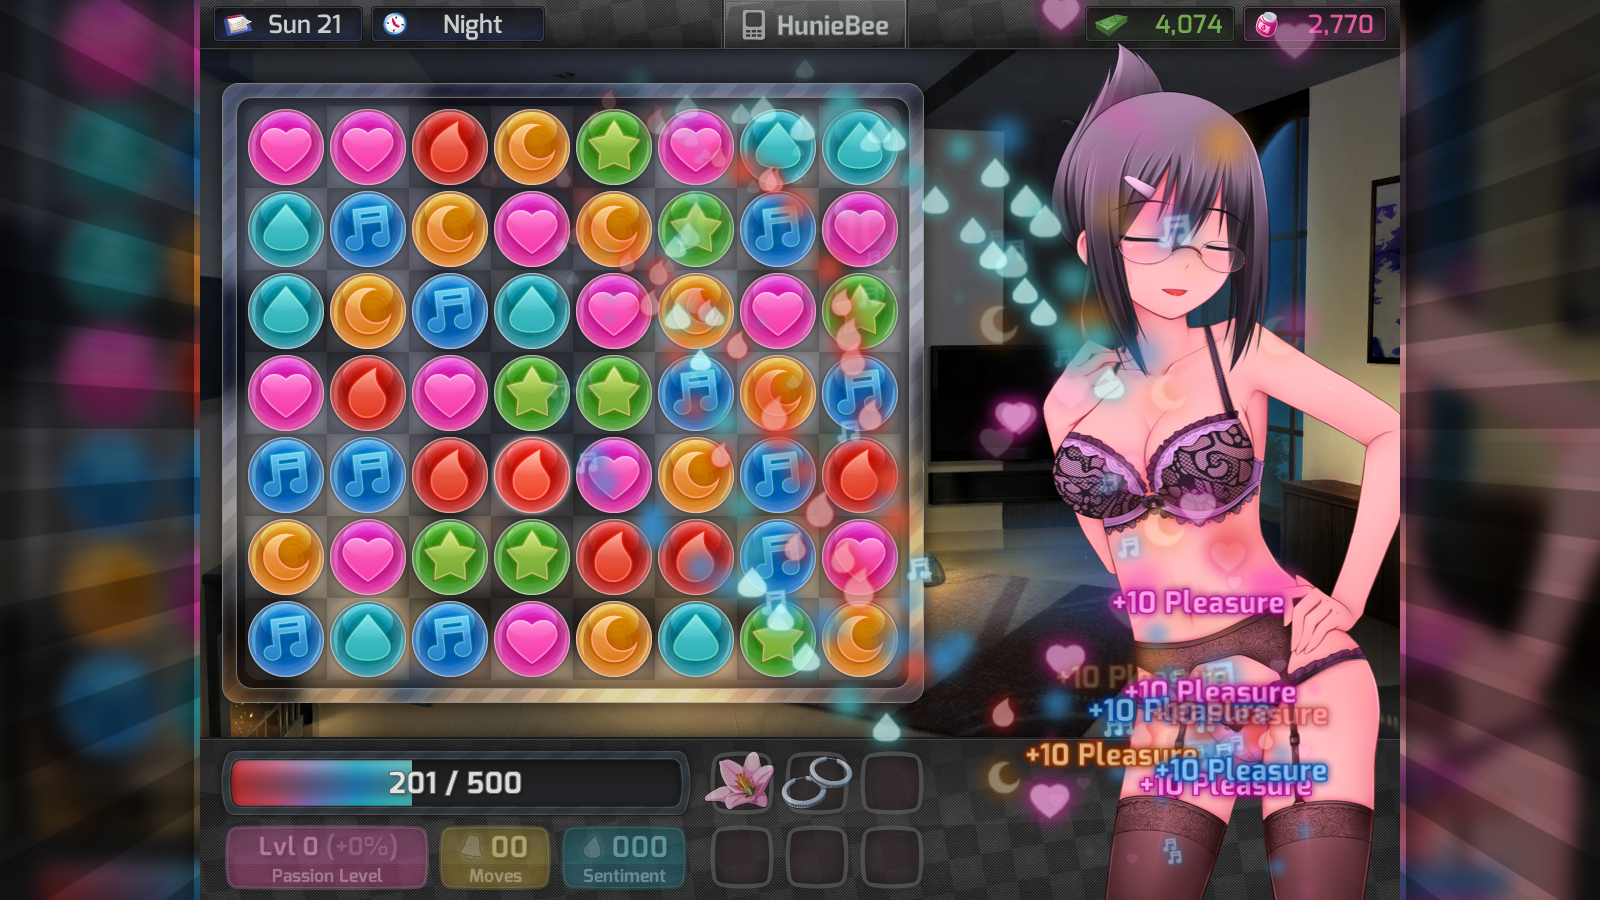 chad heineman recommends How To Uncensor Huniepop